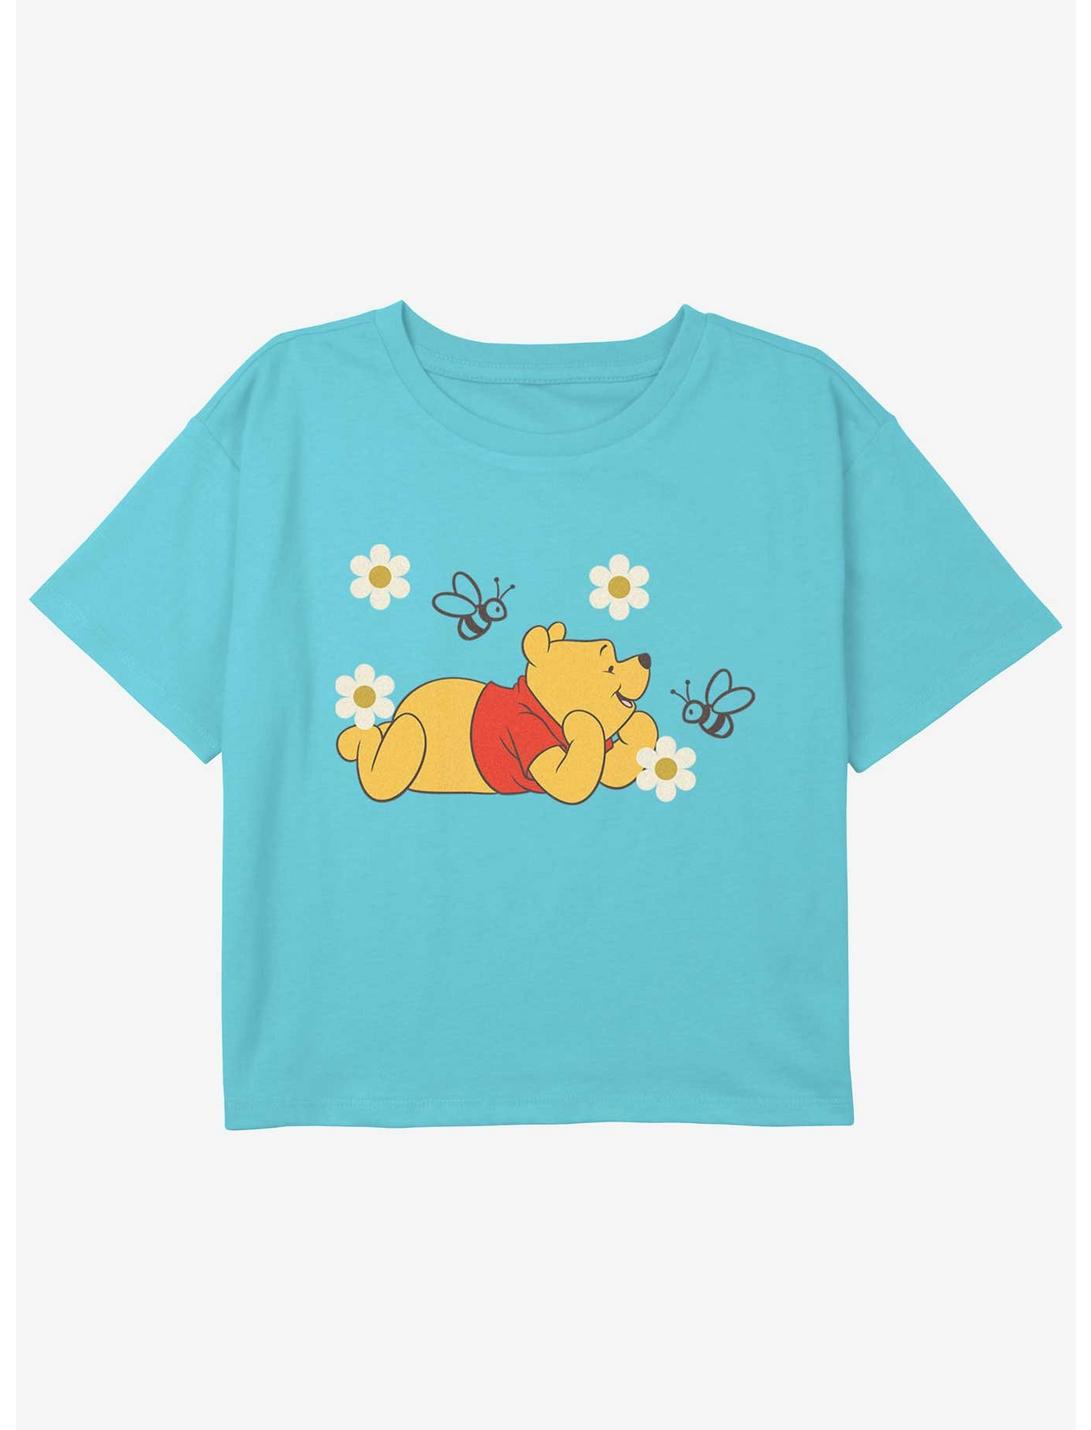 Disney Winnie The Pooh Bear and Bees Girls Youth Crop T-Shirt, BLUE, hi-res